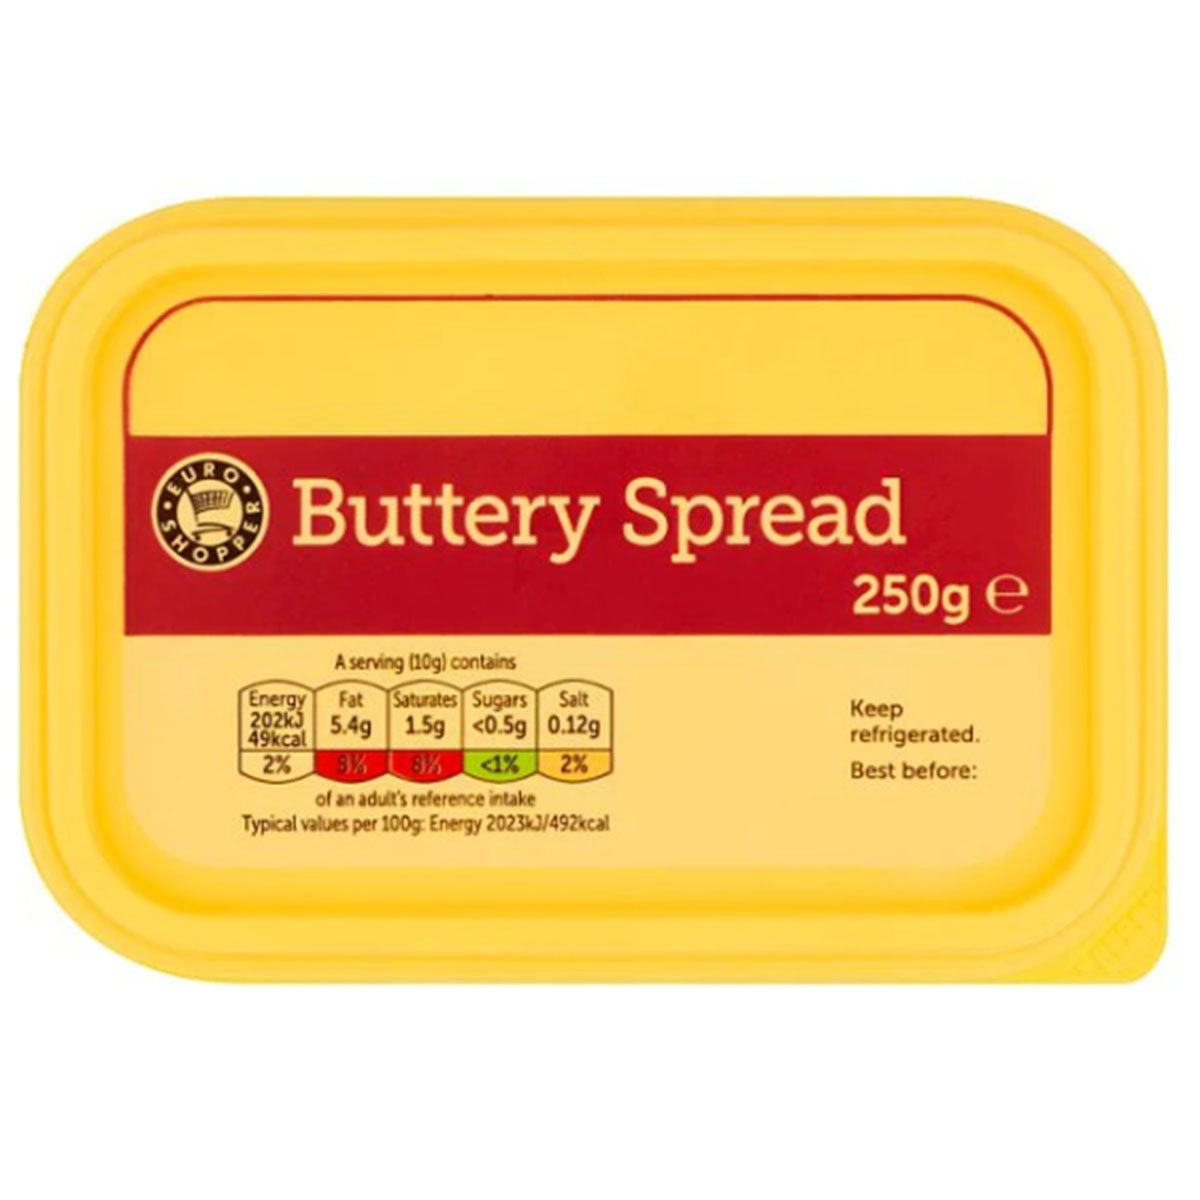 ES - Buttery Spread - 250g - Continental Food Store